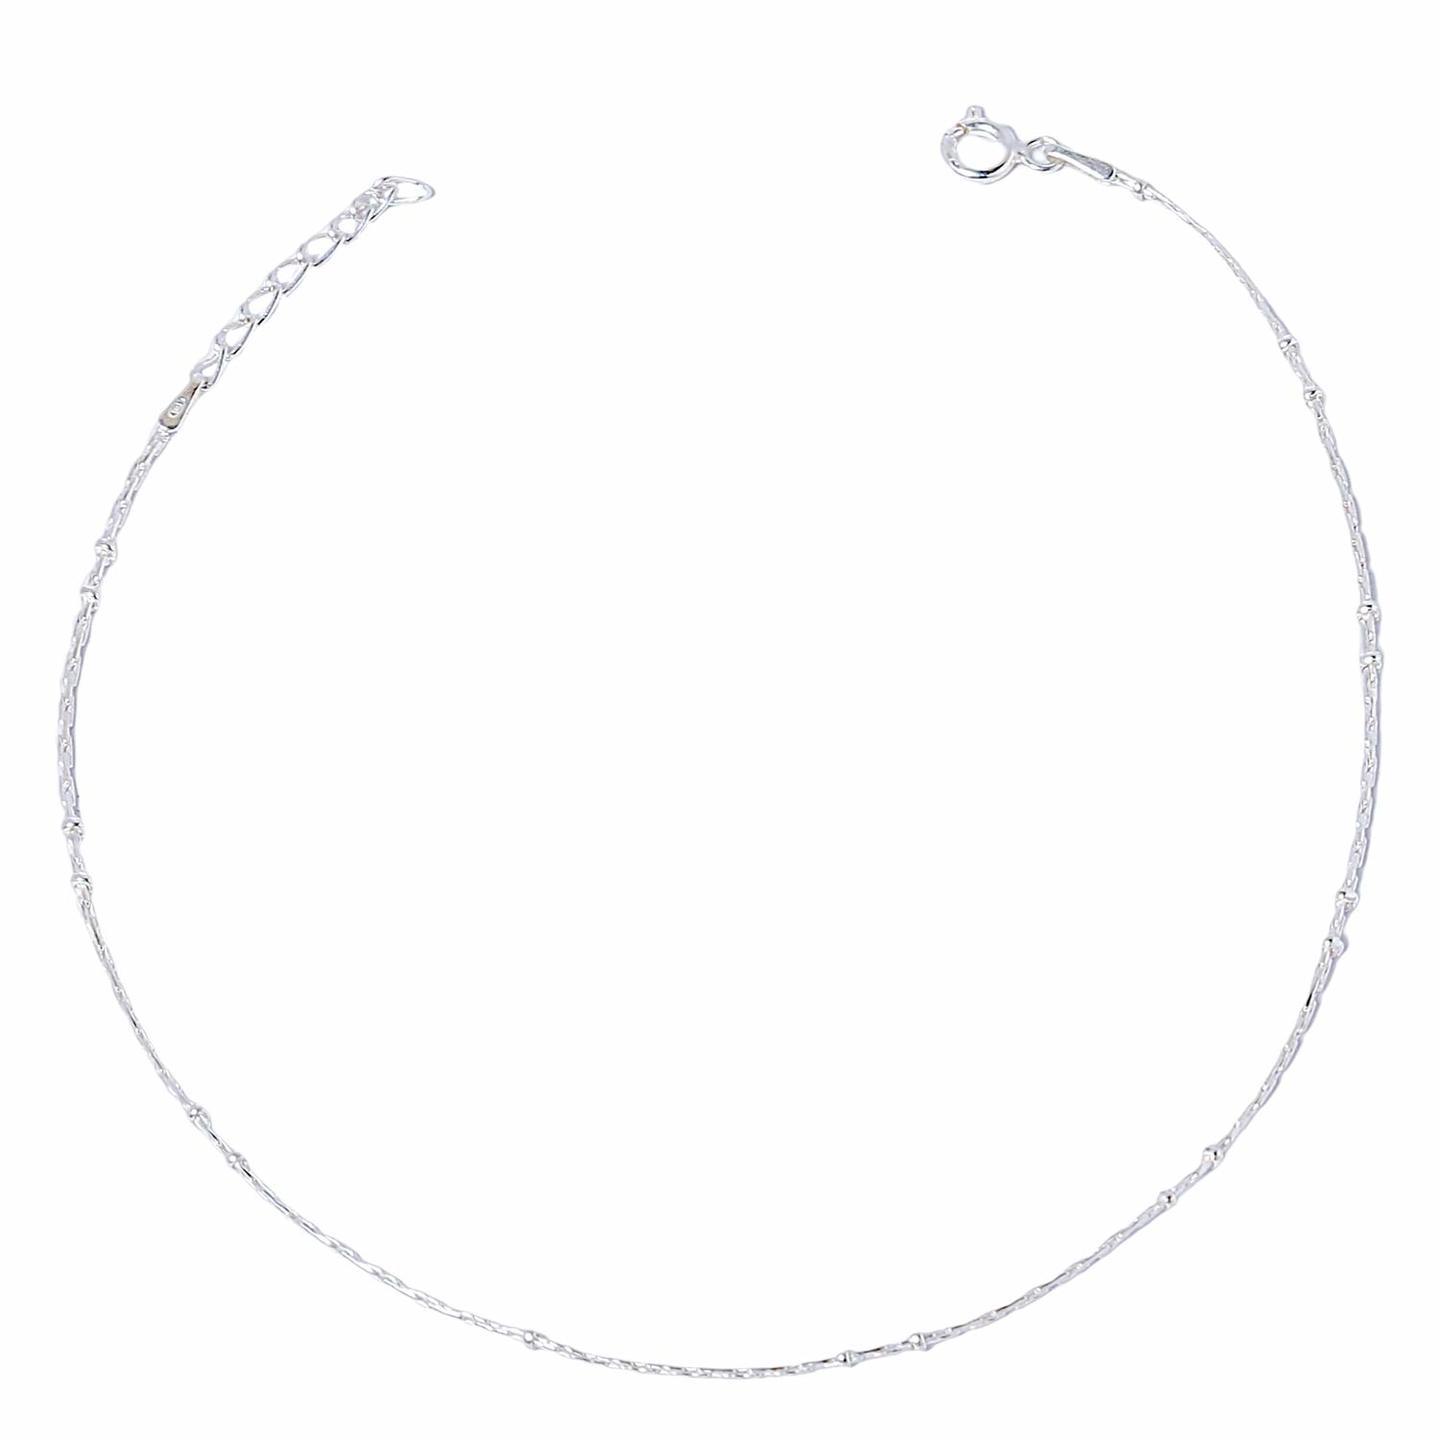 Nemichand Jewels Pure Silver 925 Anklet Payal For Women 1PC